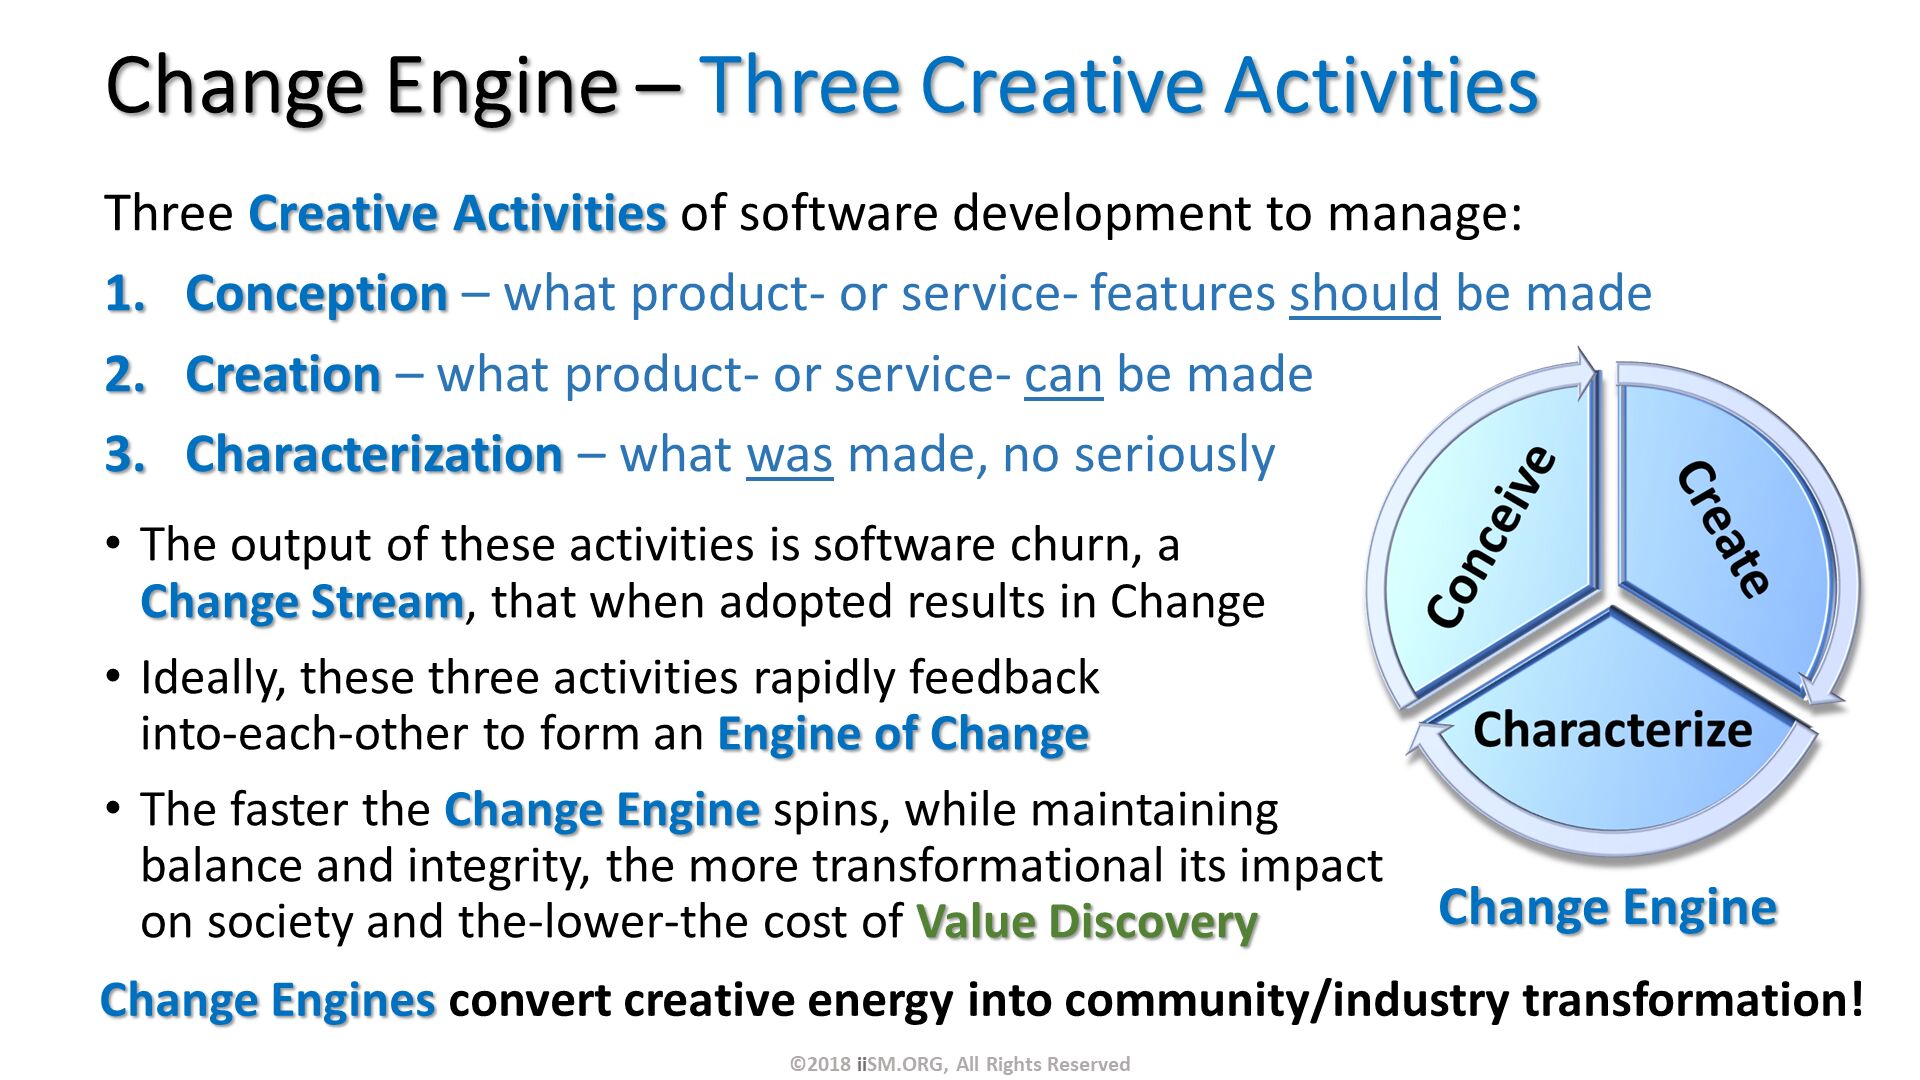 Change Engine – Three Creative Activities. Three Creative Activities of software development to manage:
Conception – what product- or service- features should be made
Creation – what product- or service- can be made
Characterization – what was made, no seriously. The output of these activities is software churn, a Change Stream, that when adopted results in Change
Ideally, these three activities rapidly feedback into-each-other to form an Engine of Change
The faster the Change Engine spins, while maintaining balance and integrity, the more transformational its impact on society and the-lower-the cost of Value Discovery. ©2018 iiSM.ORG, All Rights Reserved. Change Engines convert creative energy into community/industry transformation!

. 